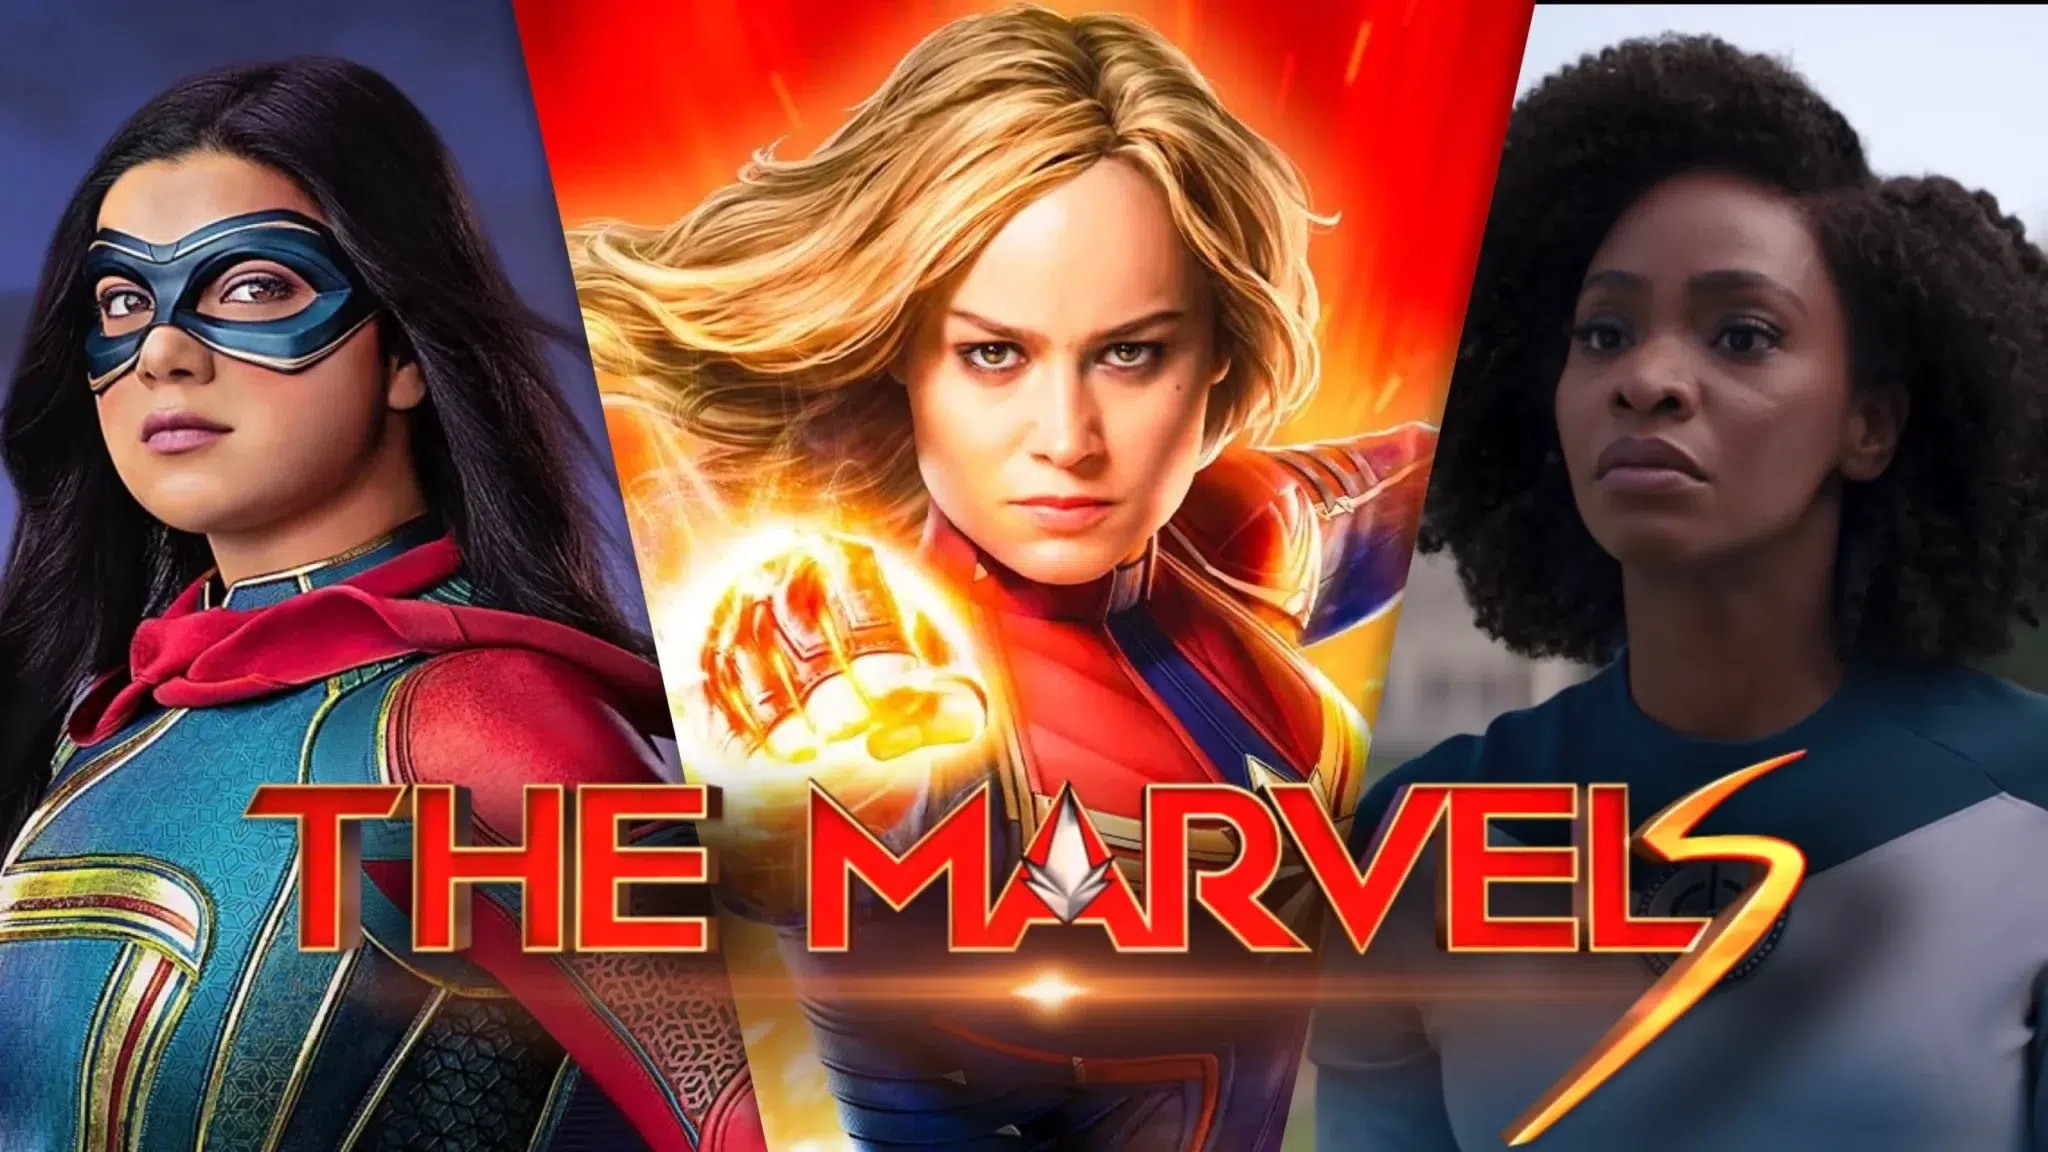 Behind the Scenes Drama: Will Brie Larson's Behavior Delay 'The Marvels' Release?